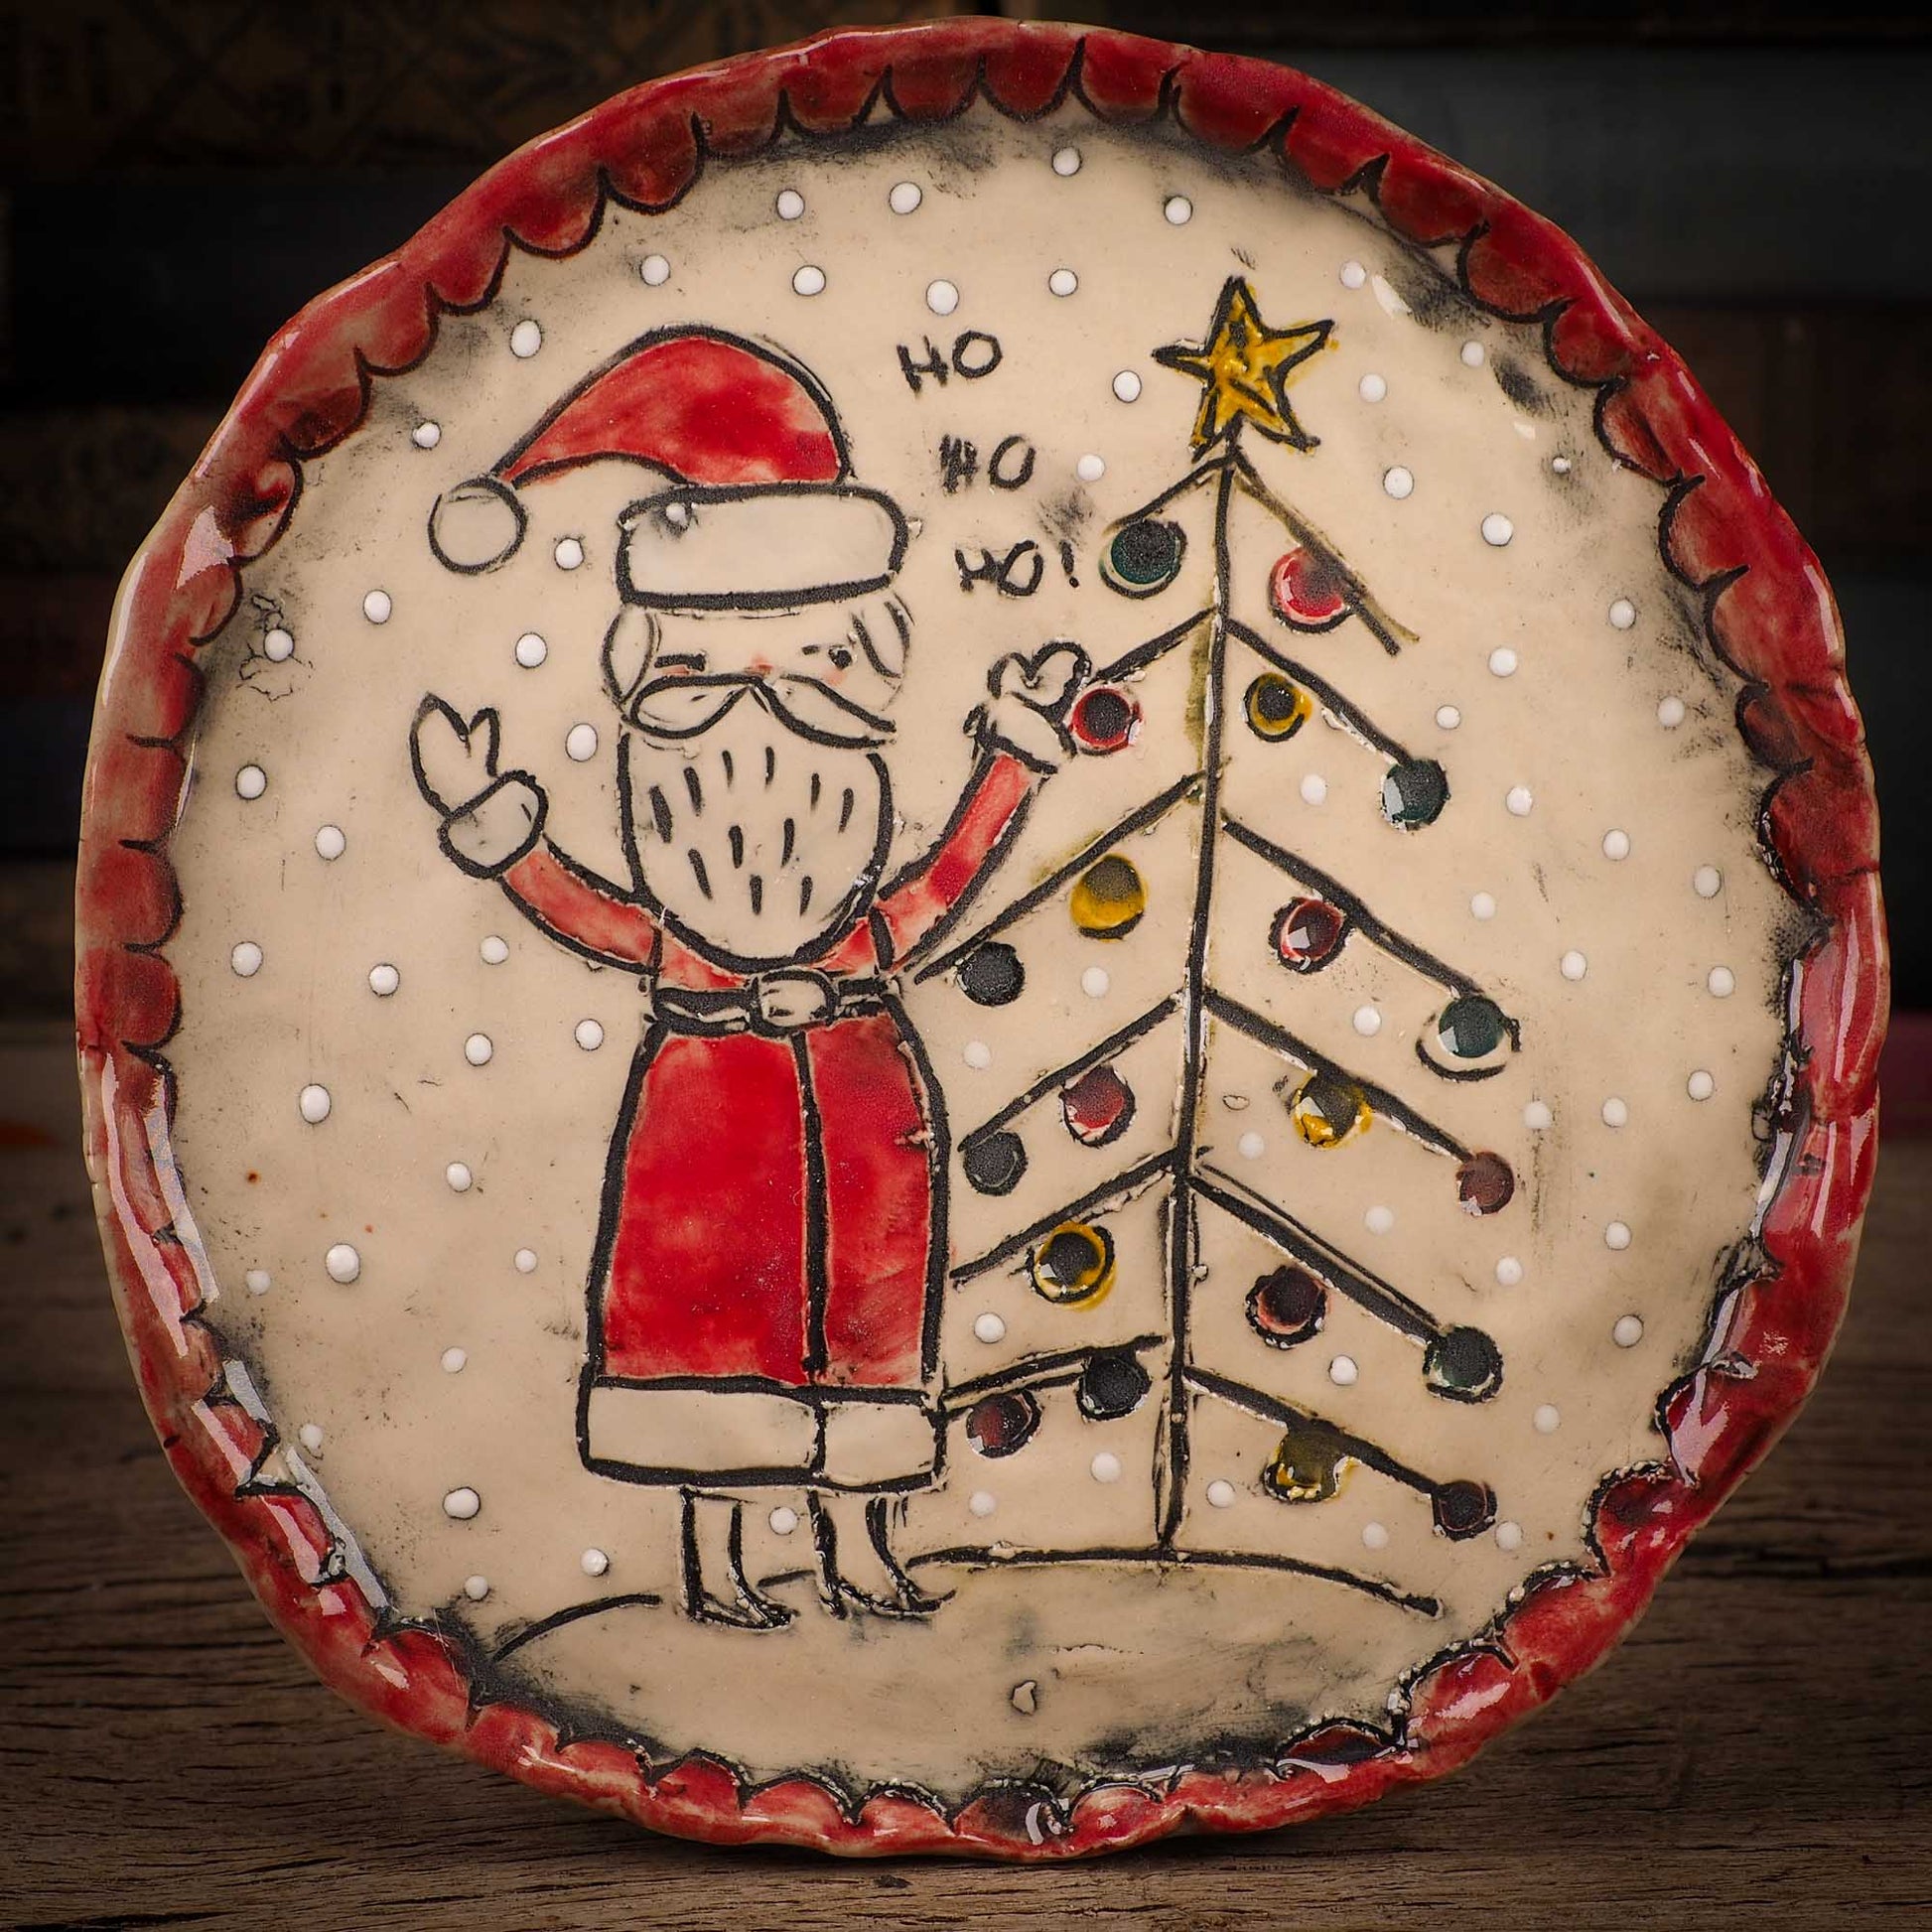 An original Christmas Holiday cake dinner dessert plate round glazed ceramic dinnerware handmade by Idania Salcido, the artist behind Danita Art. Glazed carved sgraffito stoneware, hand painted and decorated, it is illustrated by hand with snowmen, Christmas trees, Santa Claus, angels and snow balls and winter themes.